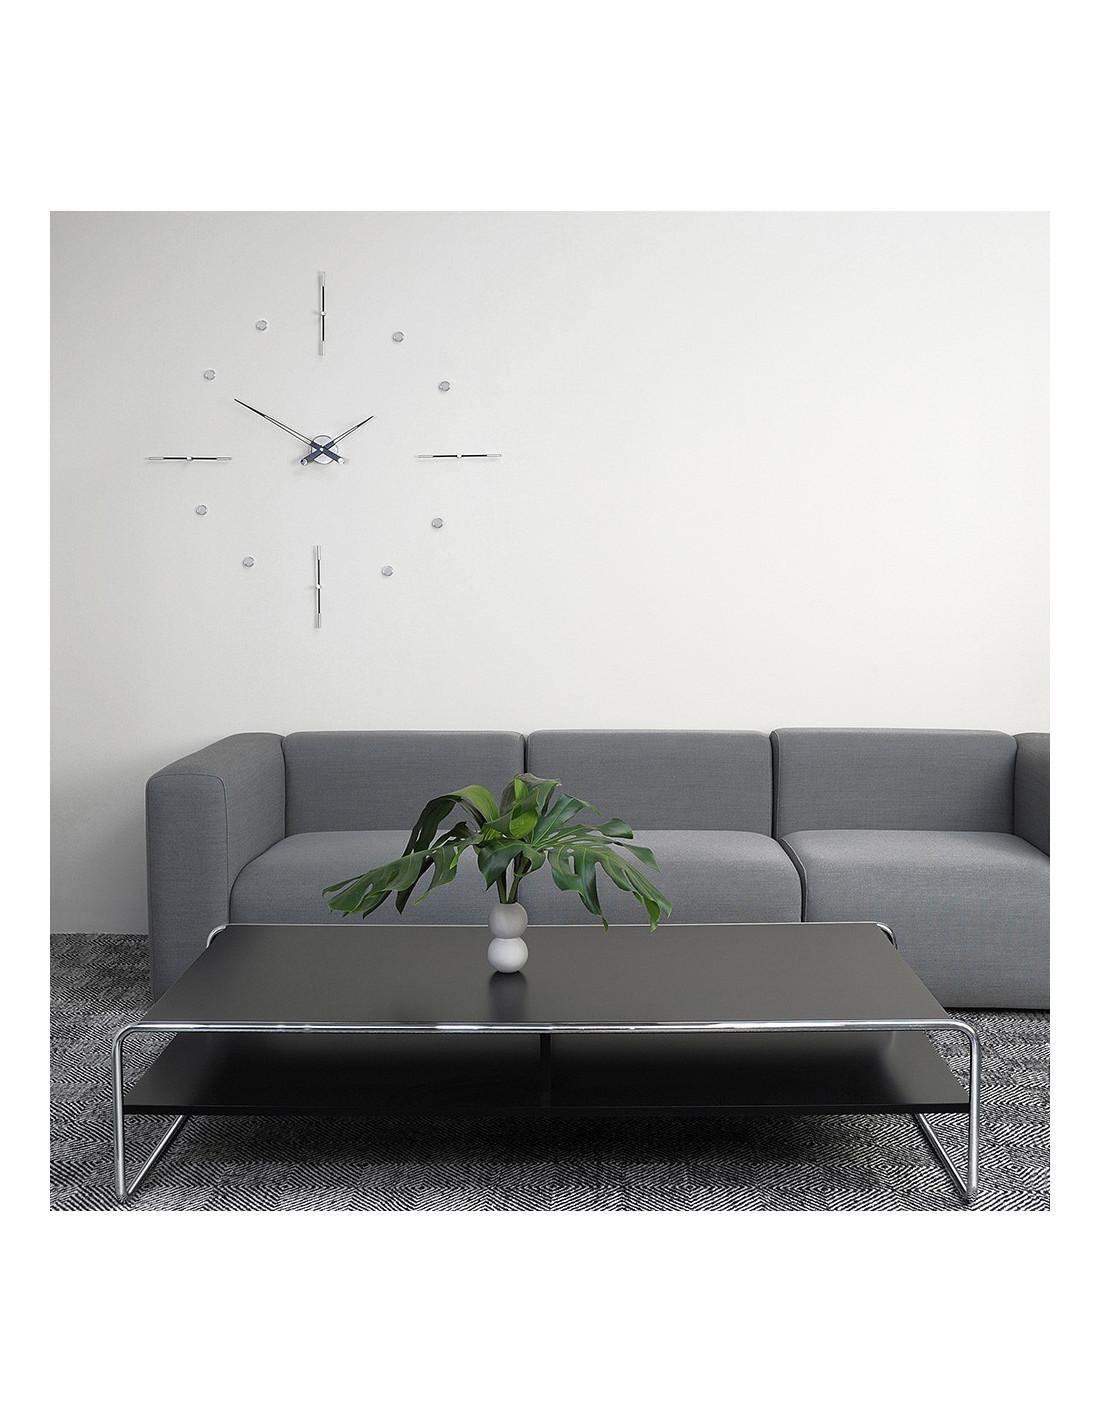 The Mixto N wall clock has an elegant and dynamic design , combining fine wood and chrome steel materials.
Mixto N wall clock : chromed brass and walnut, hands in walnut.
                                 chromed brass and wenge finish, hands in